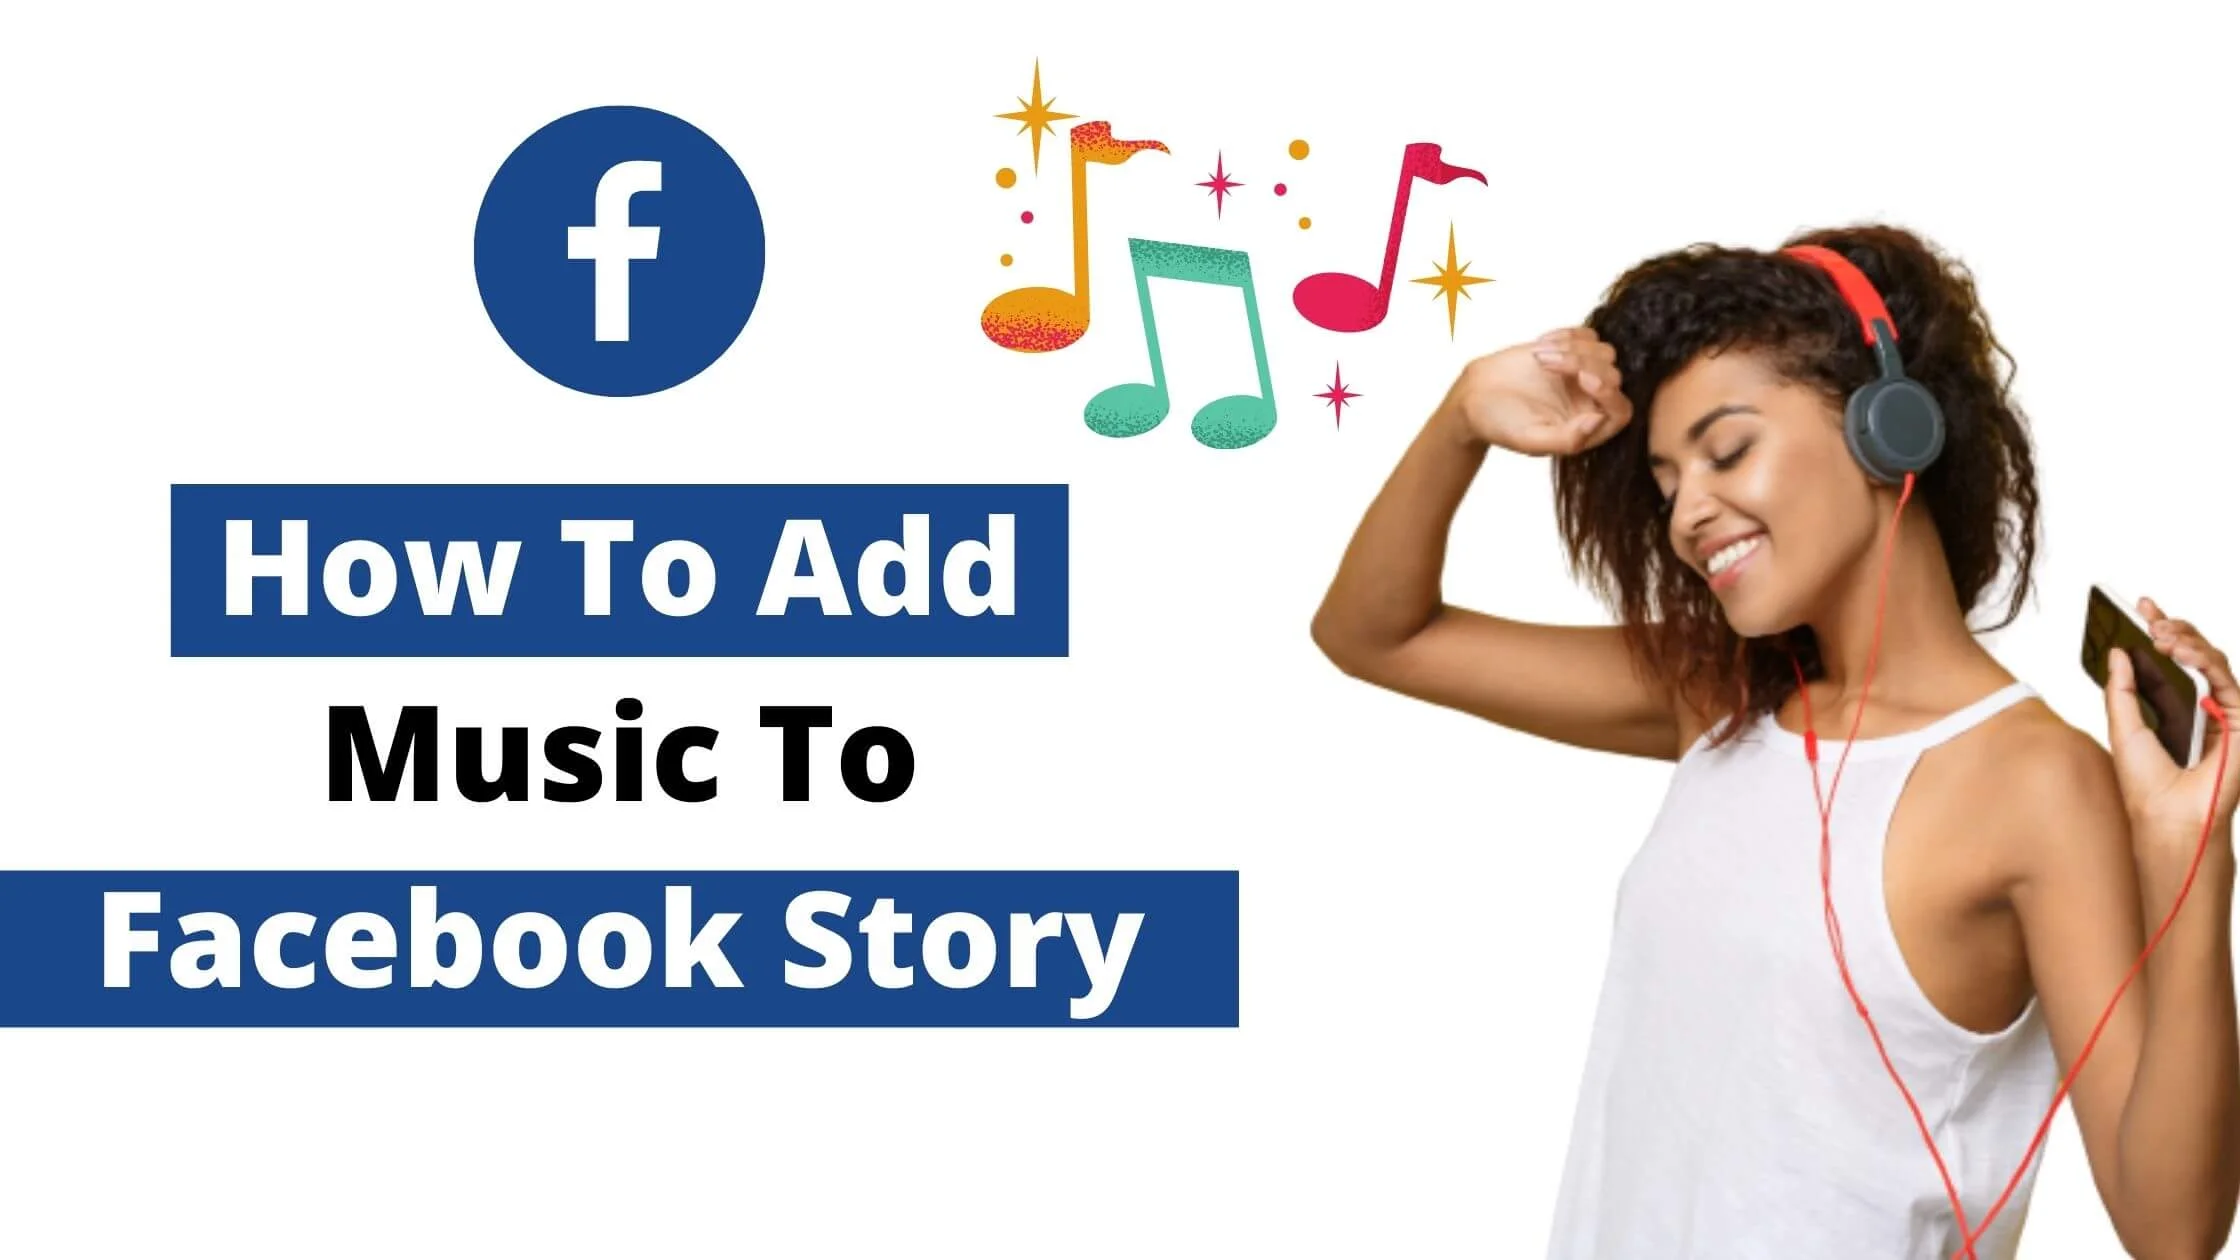 How To Add Music To Facebook Story